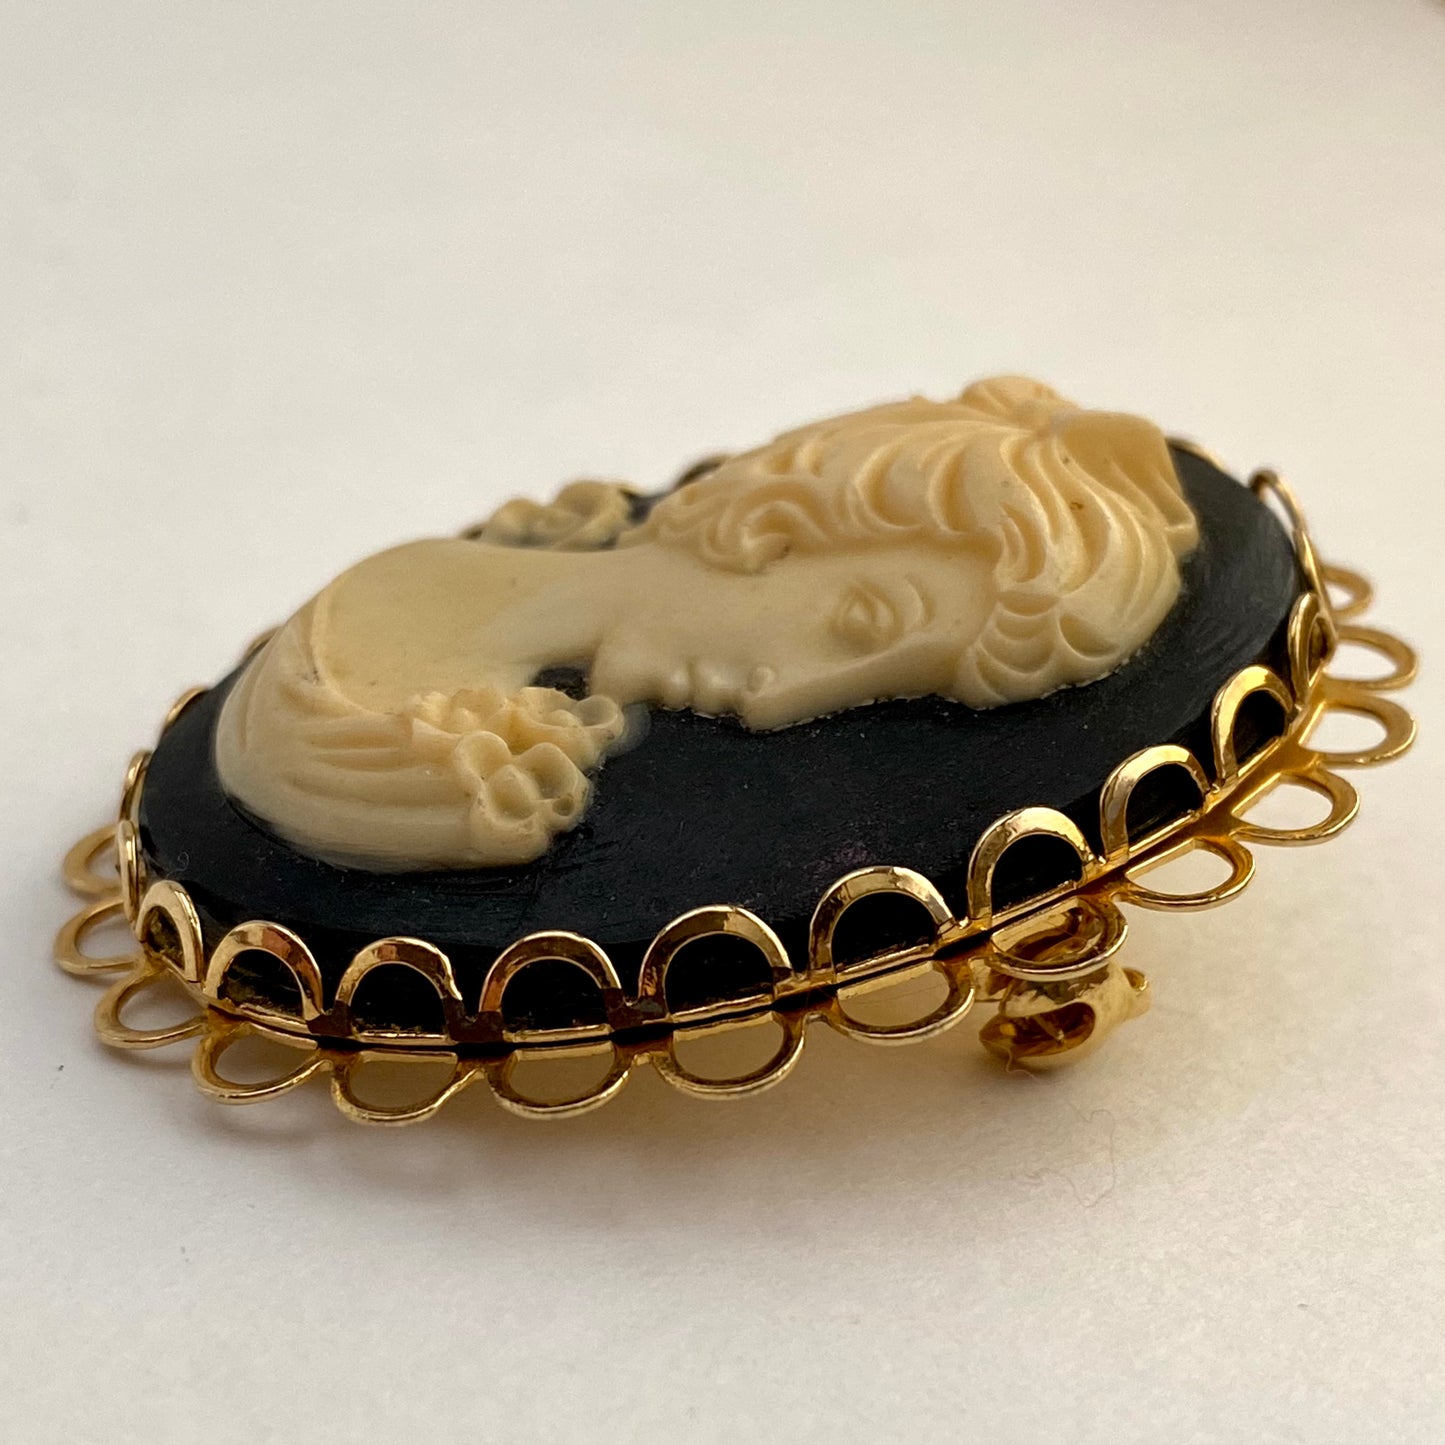 Late 70s/ Early 80s Cameo Brooch